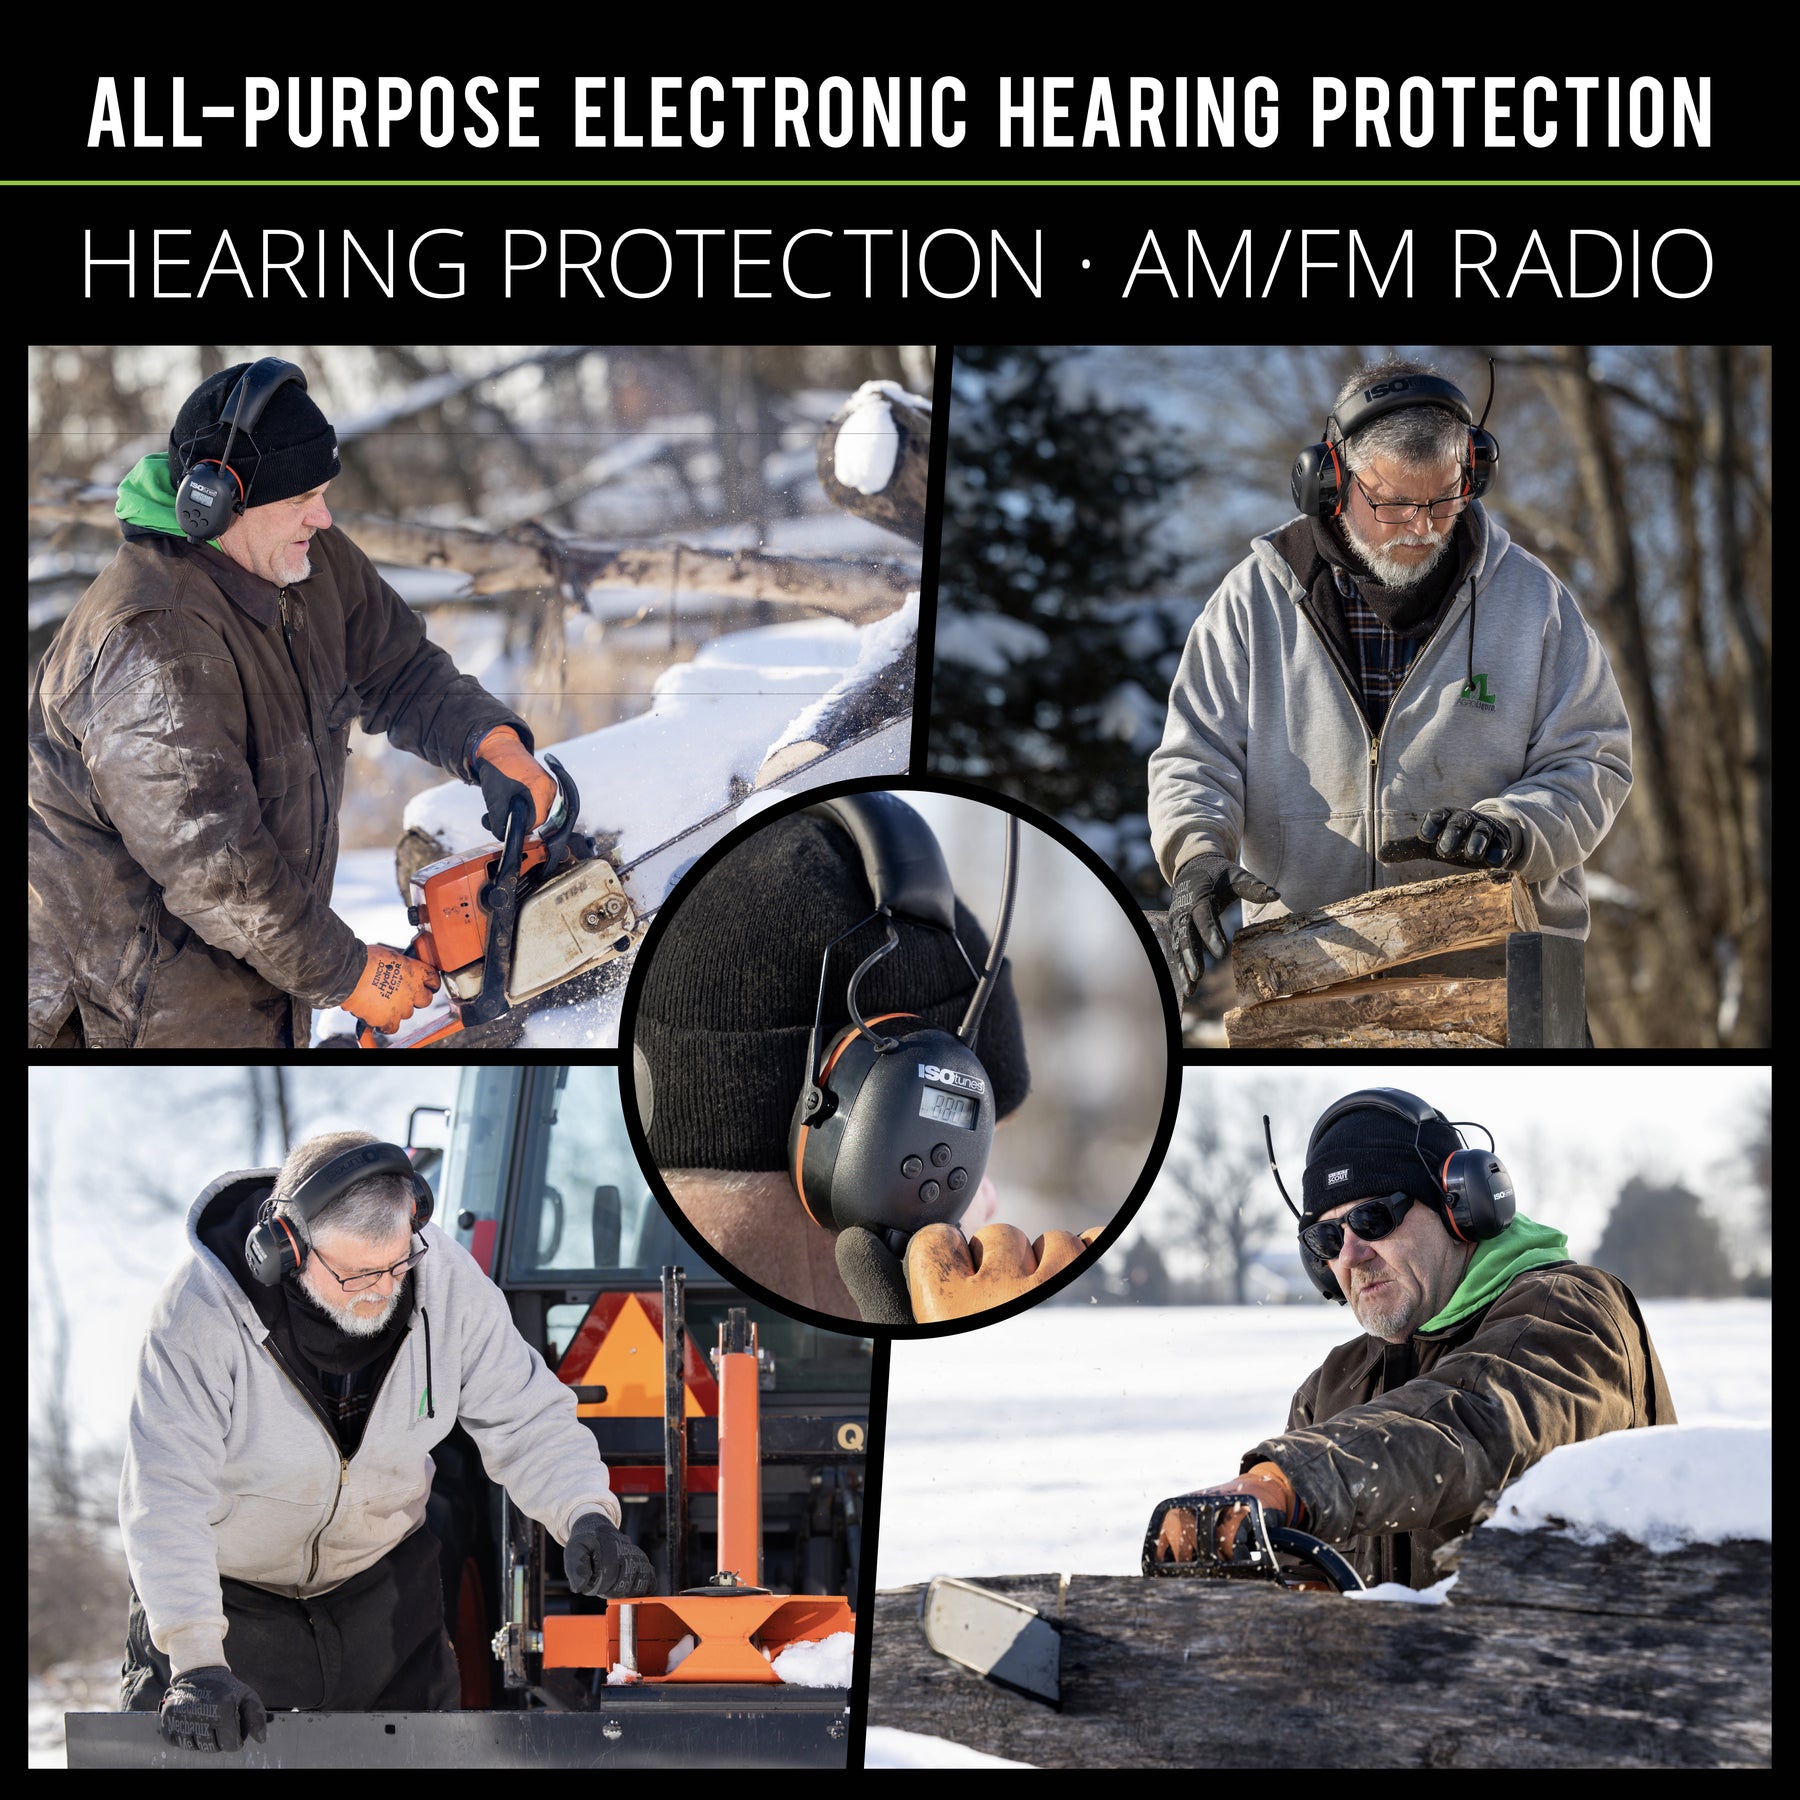 ISOtunes AIR DEFENDER AM/FM All-Purpose Electronic Hearing Protection with AM/FM Radio